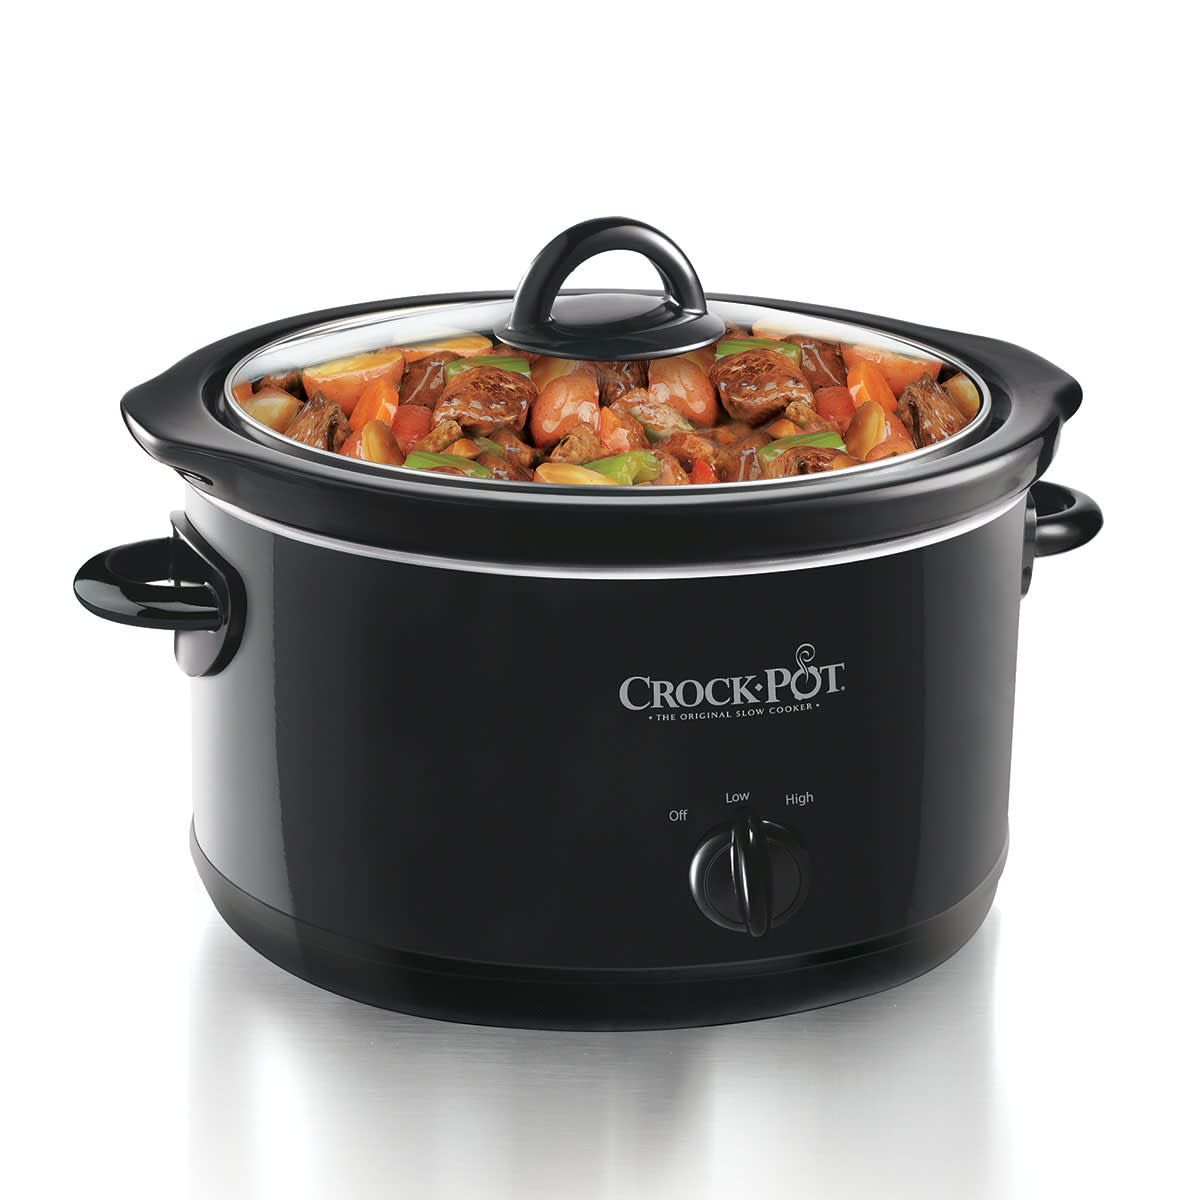 5 Best Slow Cookers According To Experts